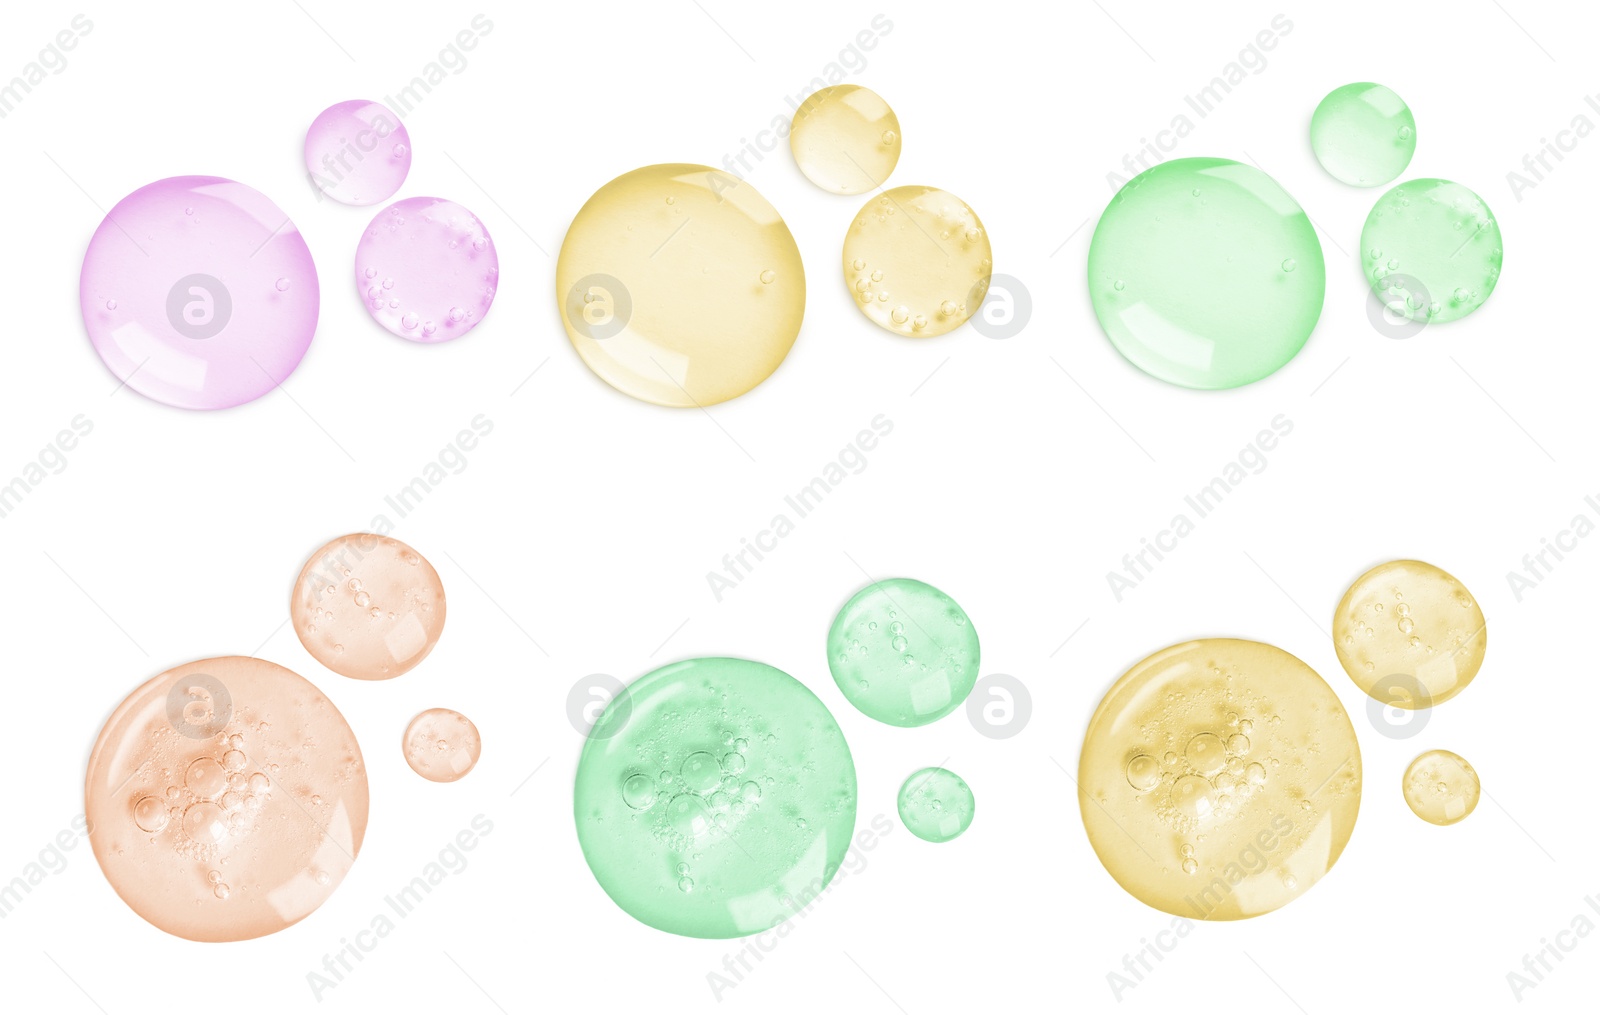 Image of Serum drops on white background, top view. Skin care product